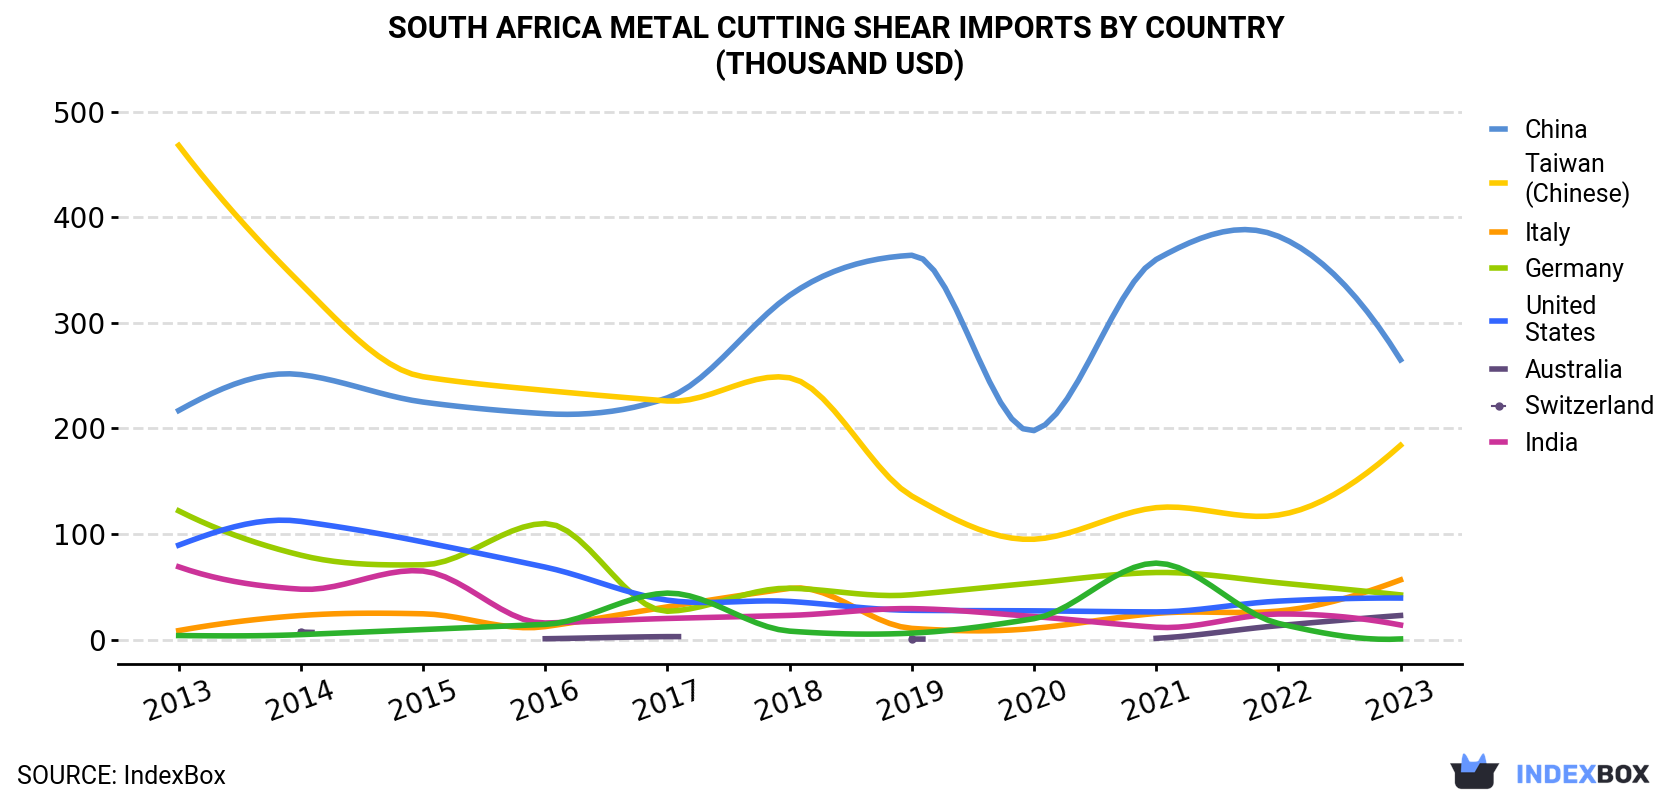 South Africa Metal Cutting Shear Imports By Country (Thousand USD)